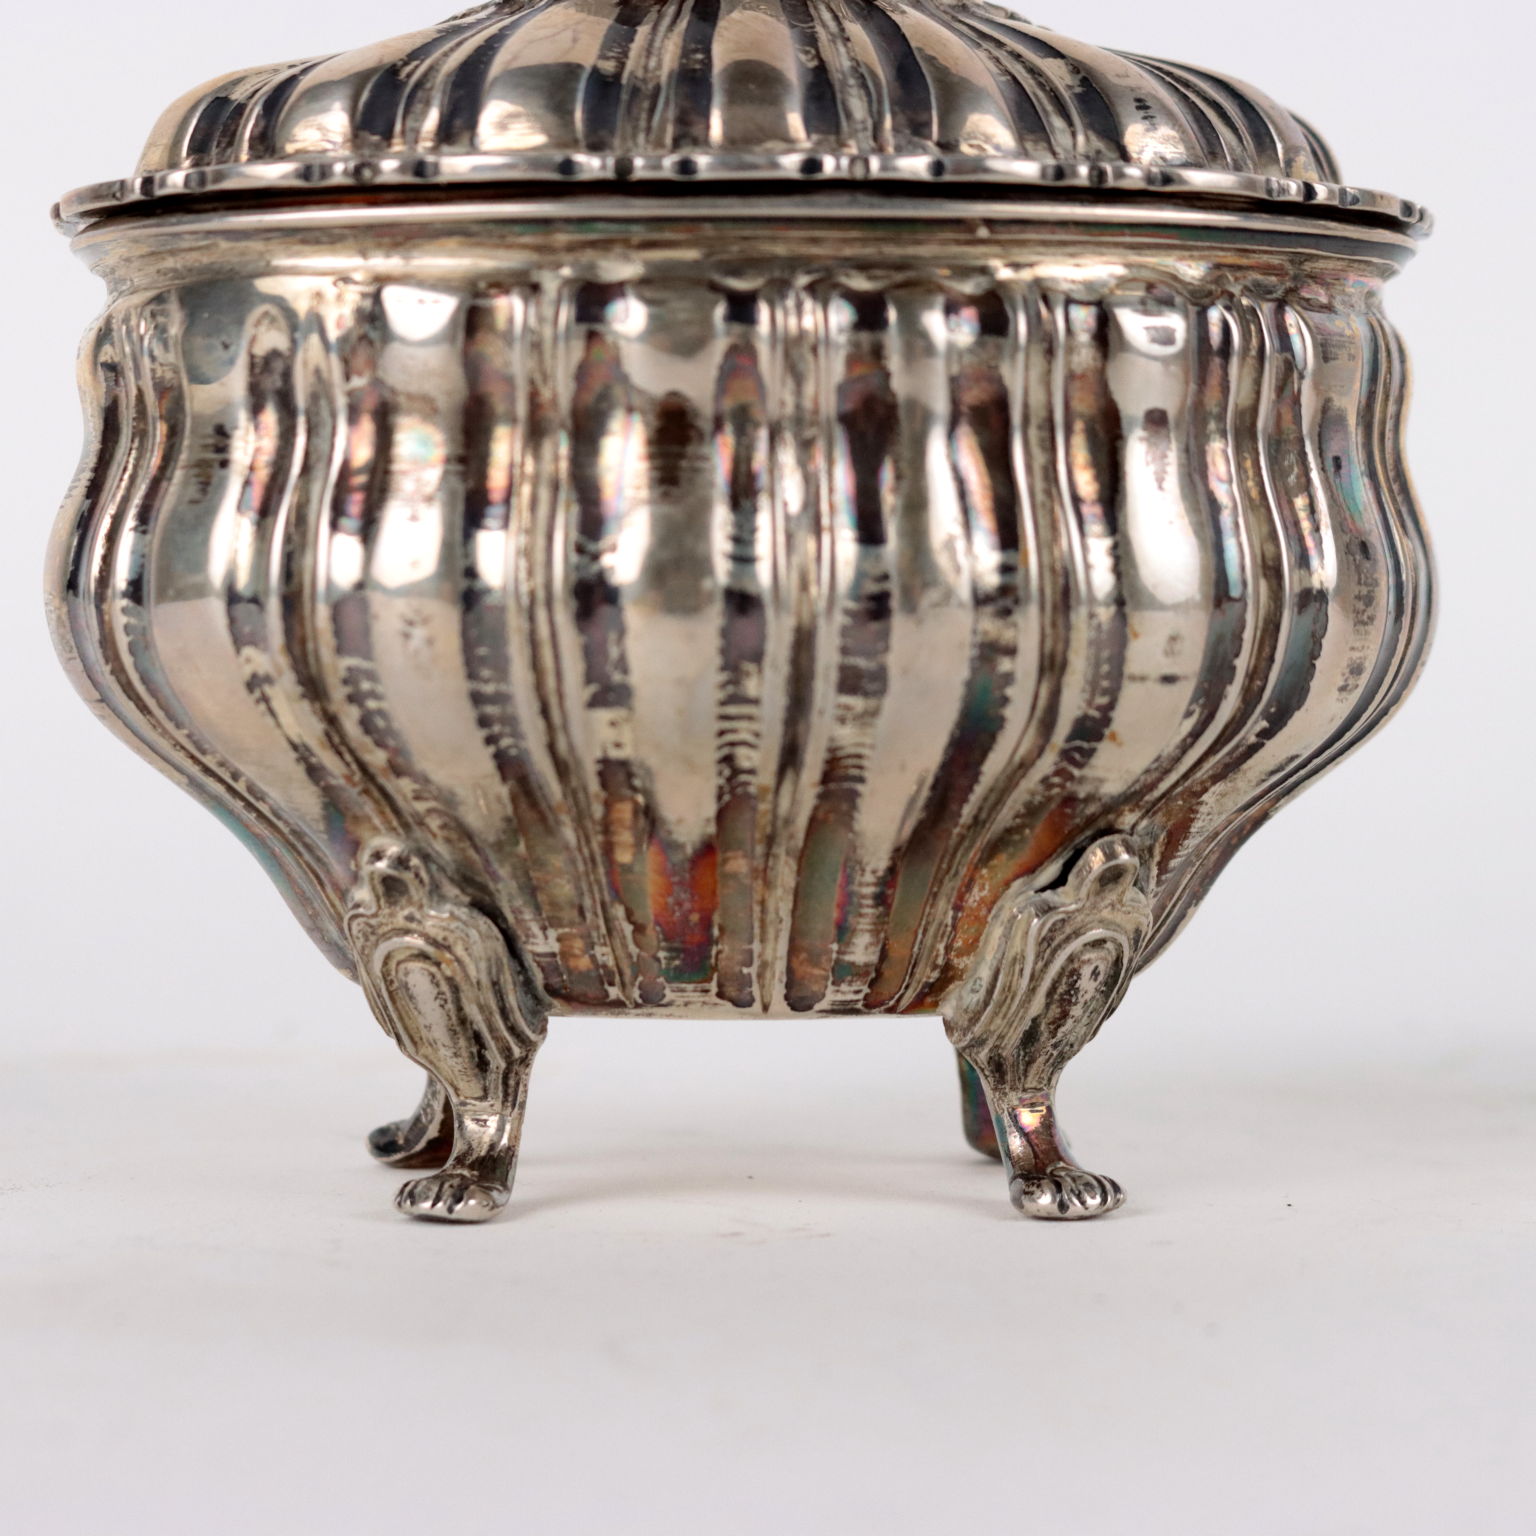 Bowl with Oxidized Brass Lid, Italy, 1940s for sale at Pamono